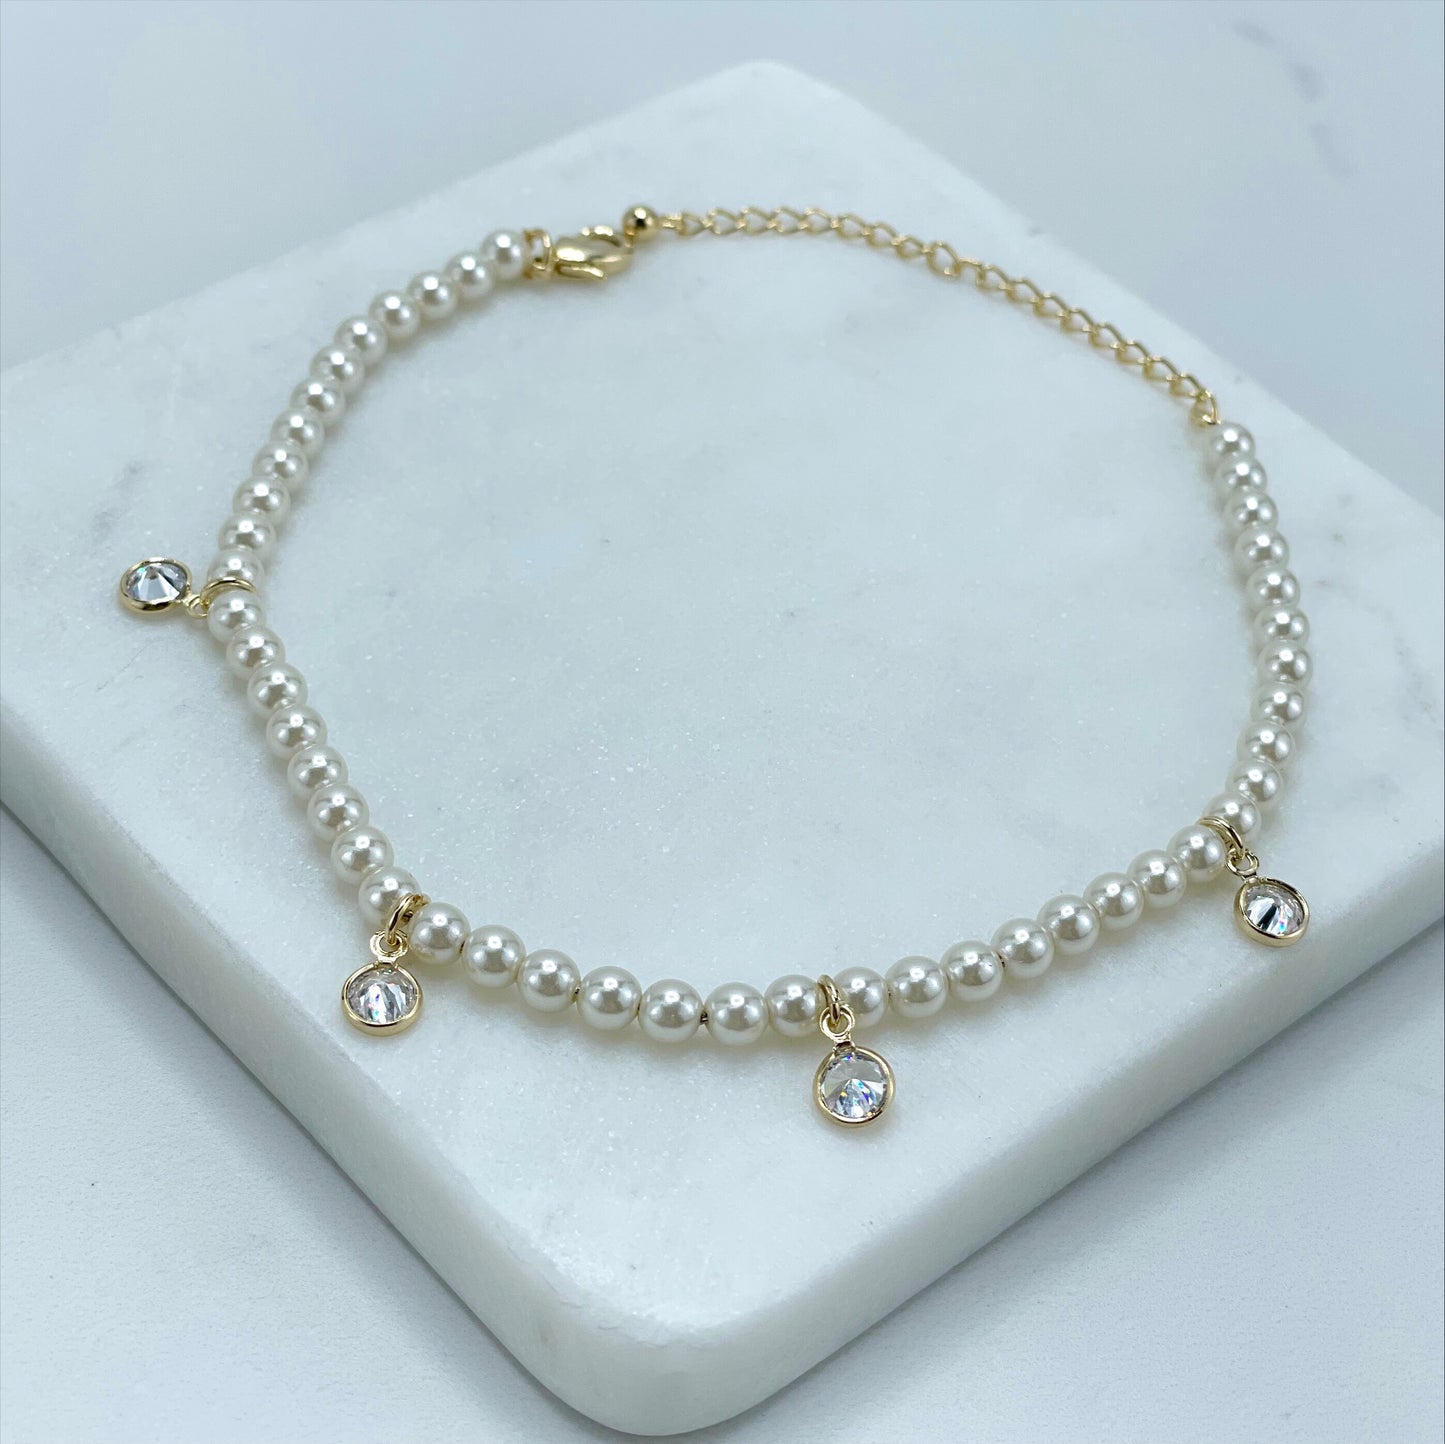 18k Gold Filled 4mm White Simulated Pearls, Width Cubic Zirconia Necklace or Bracelet Set Wholesale Jewelry Supplies